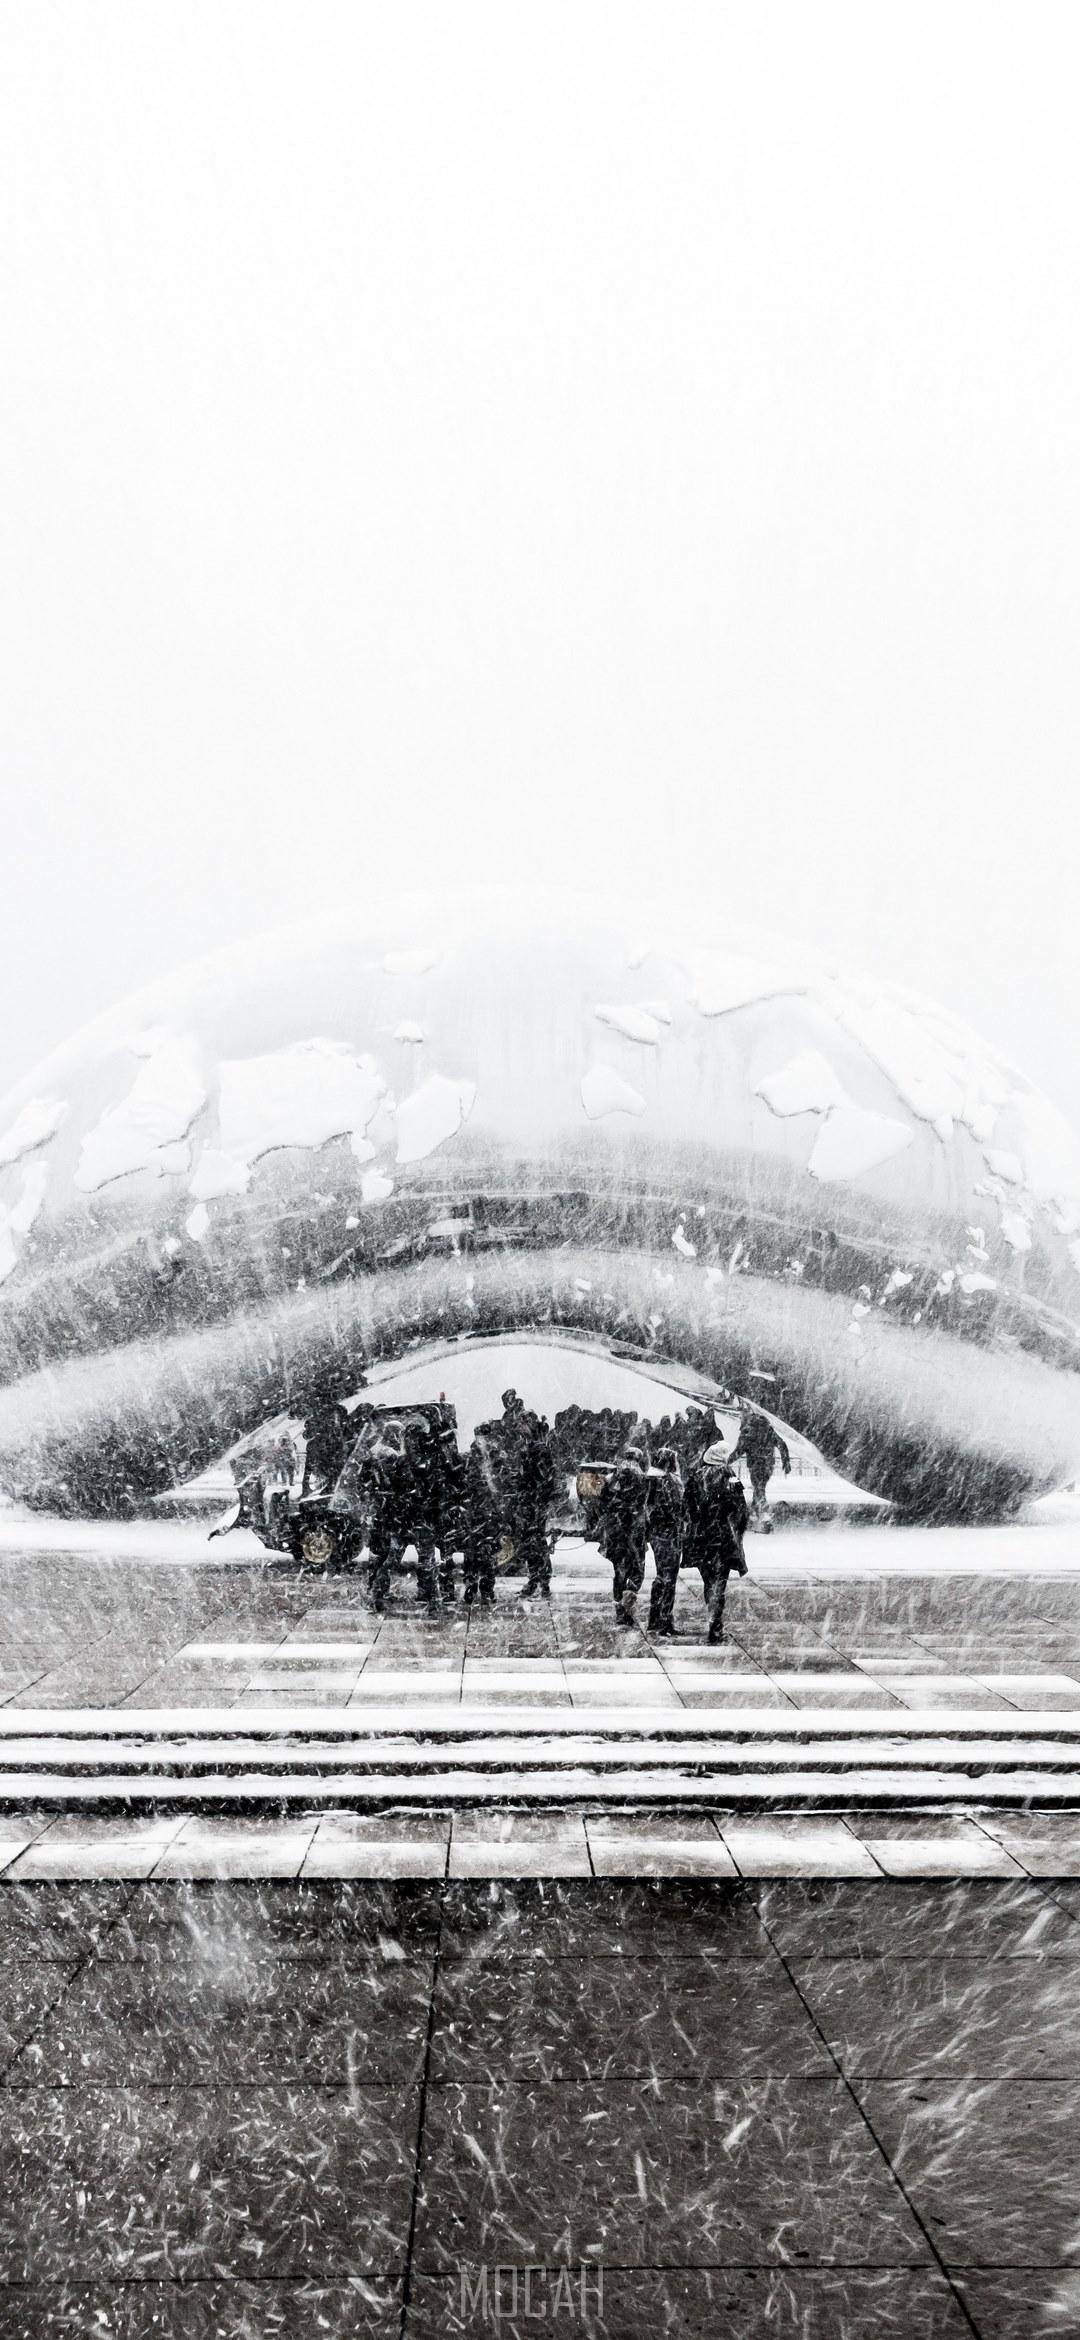 HD wallpaper, Zte Axon 11 4G Hd Download, 1080X2340, Black And White Shot Of Group Of People Standing Near Modern Sculpture In Heavy Snow Chicago, The Bean Snowy In March